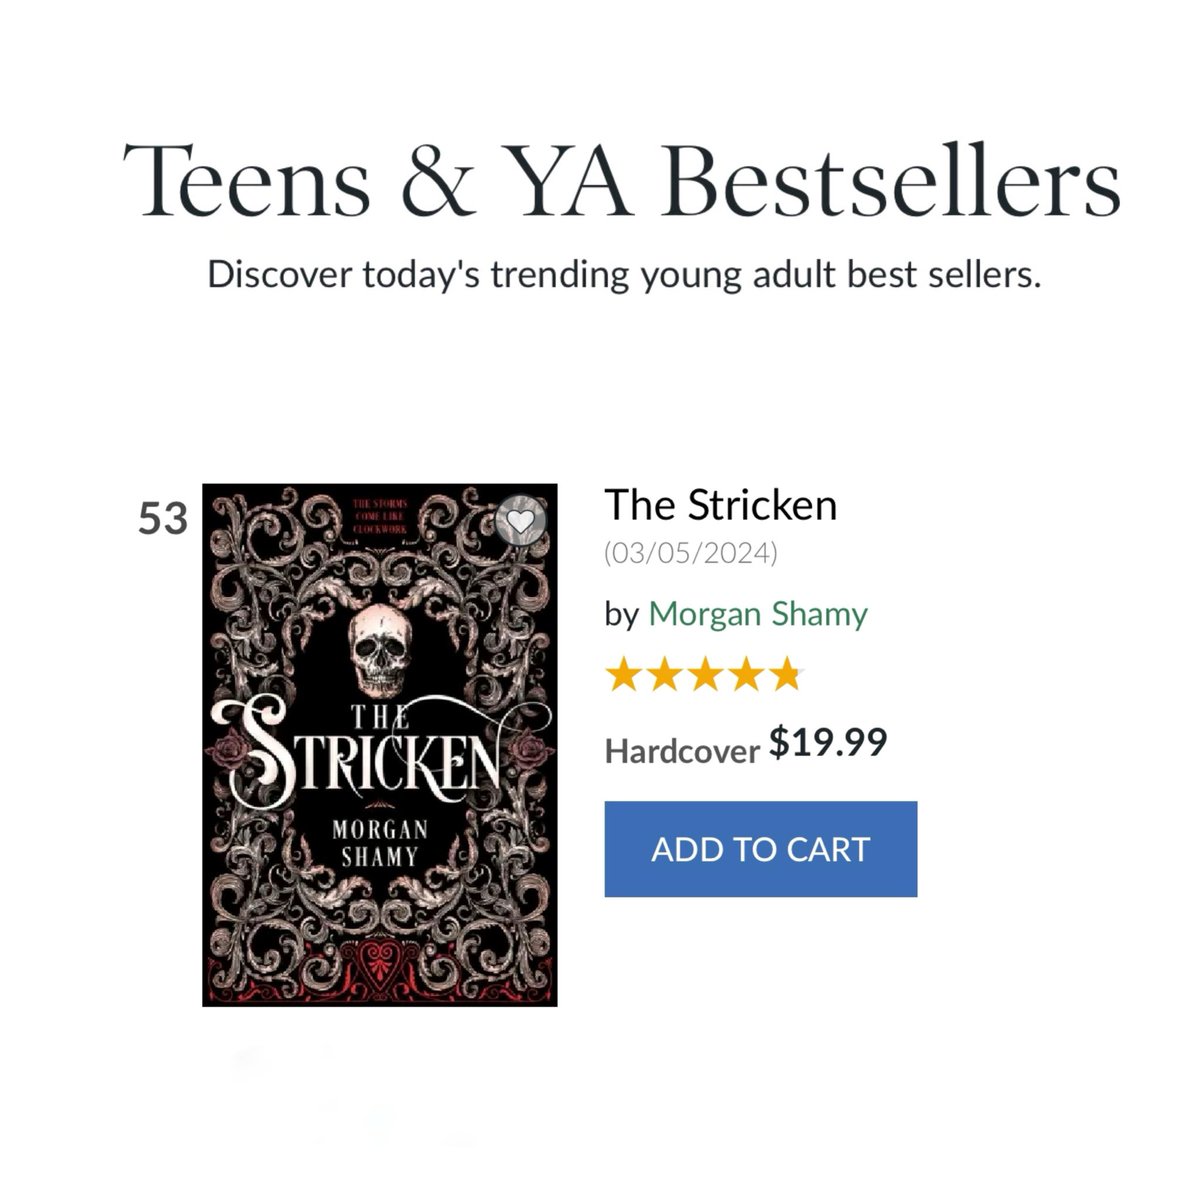 I’m in the Top 100 AGAIN for Teen & YA Bestsellers on Barnes & Noble! YAYY!! (Right next to Twilight, lol!) If you haven’t purchased yet, consider buying there to support! 🙌💀🙏🏻🎉🔥🔪🩸🏴‍☠️📚 @CamCatBooks